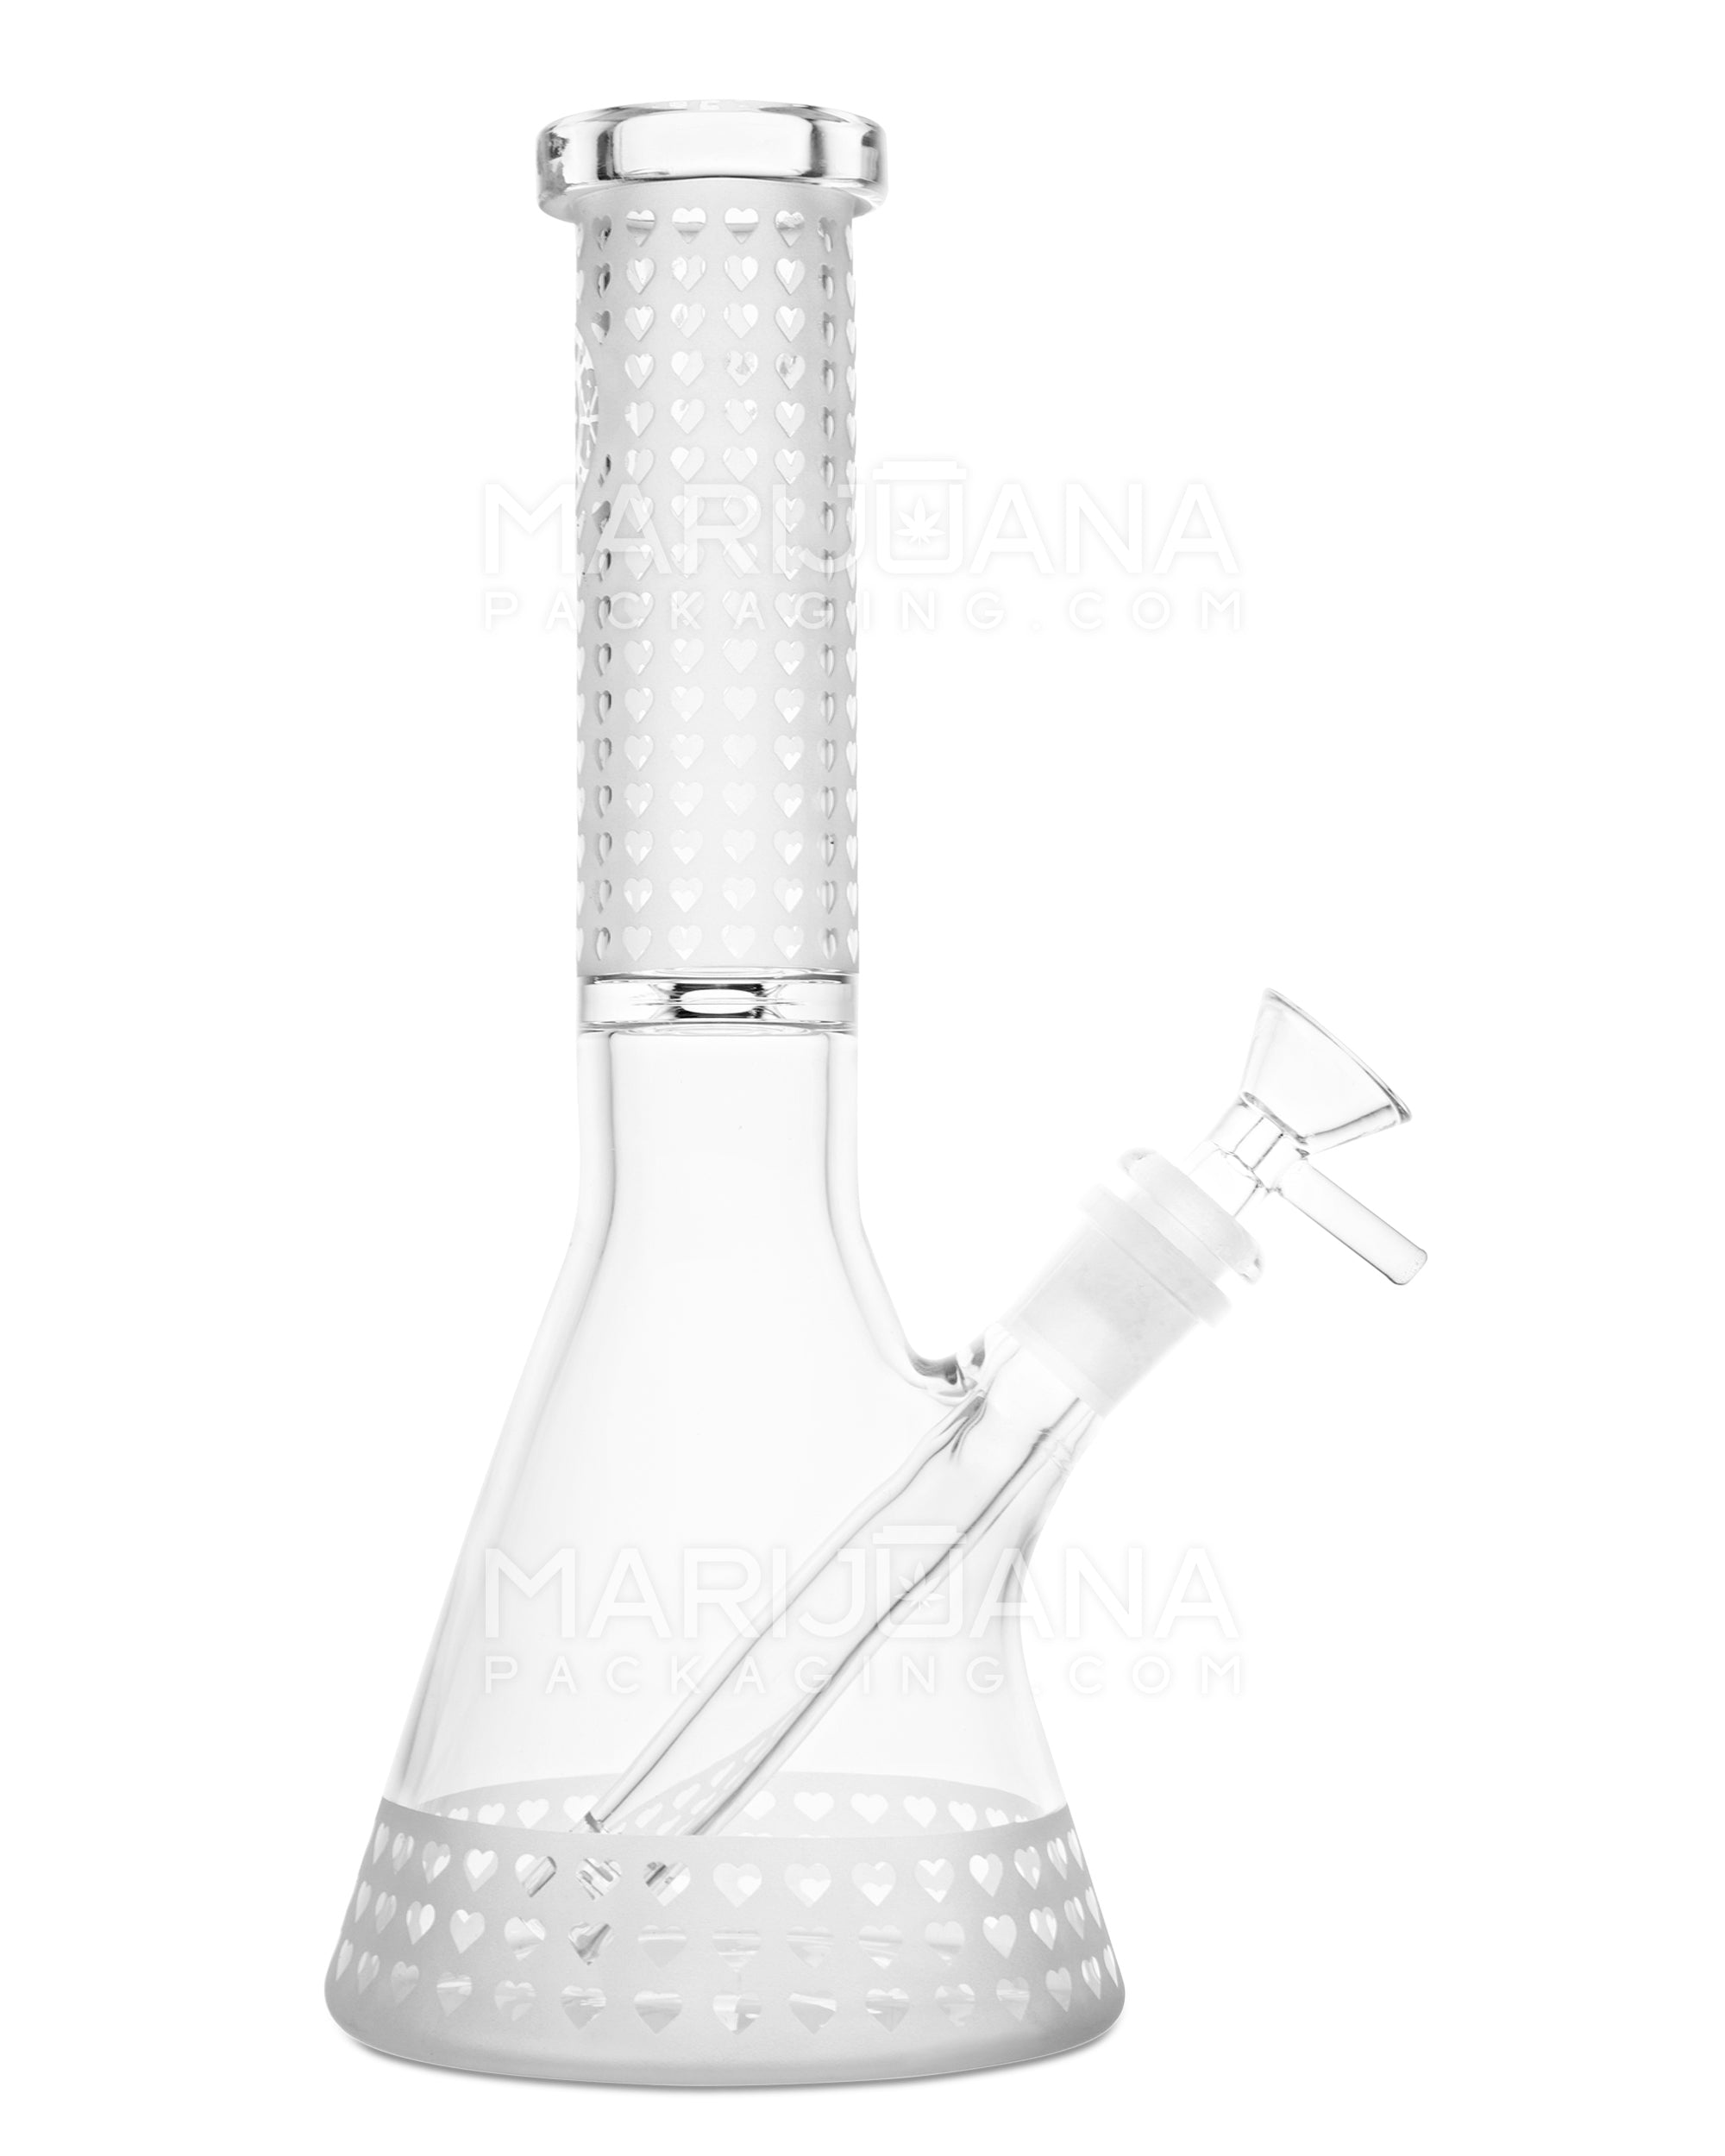 Straight Neck Sandblasted Hearts Decal Glass Beaker Water Pipe | 10.5in Tall - 14mm Bowl - Clear - 1